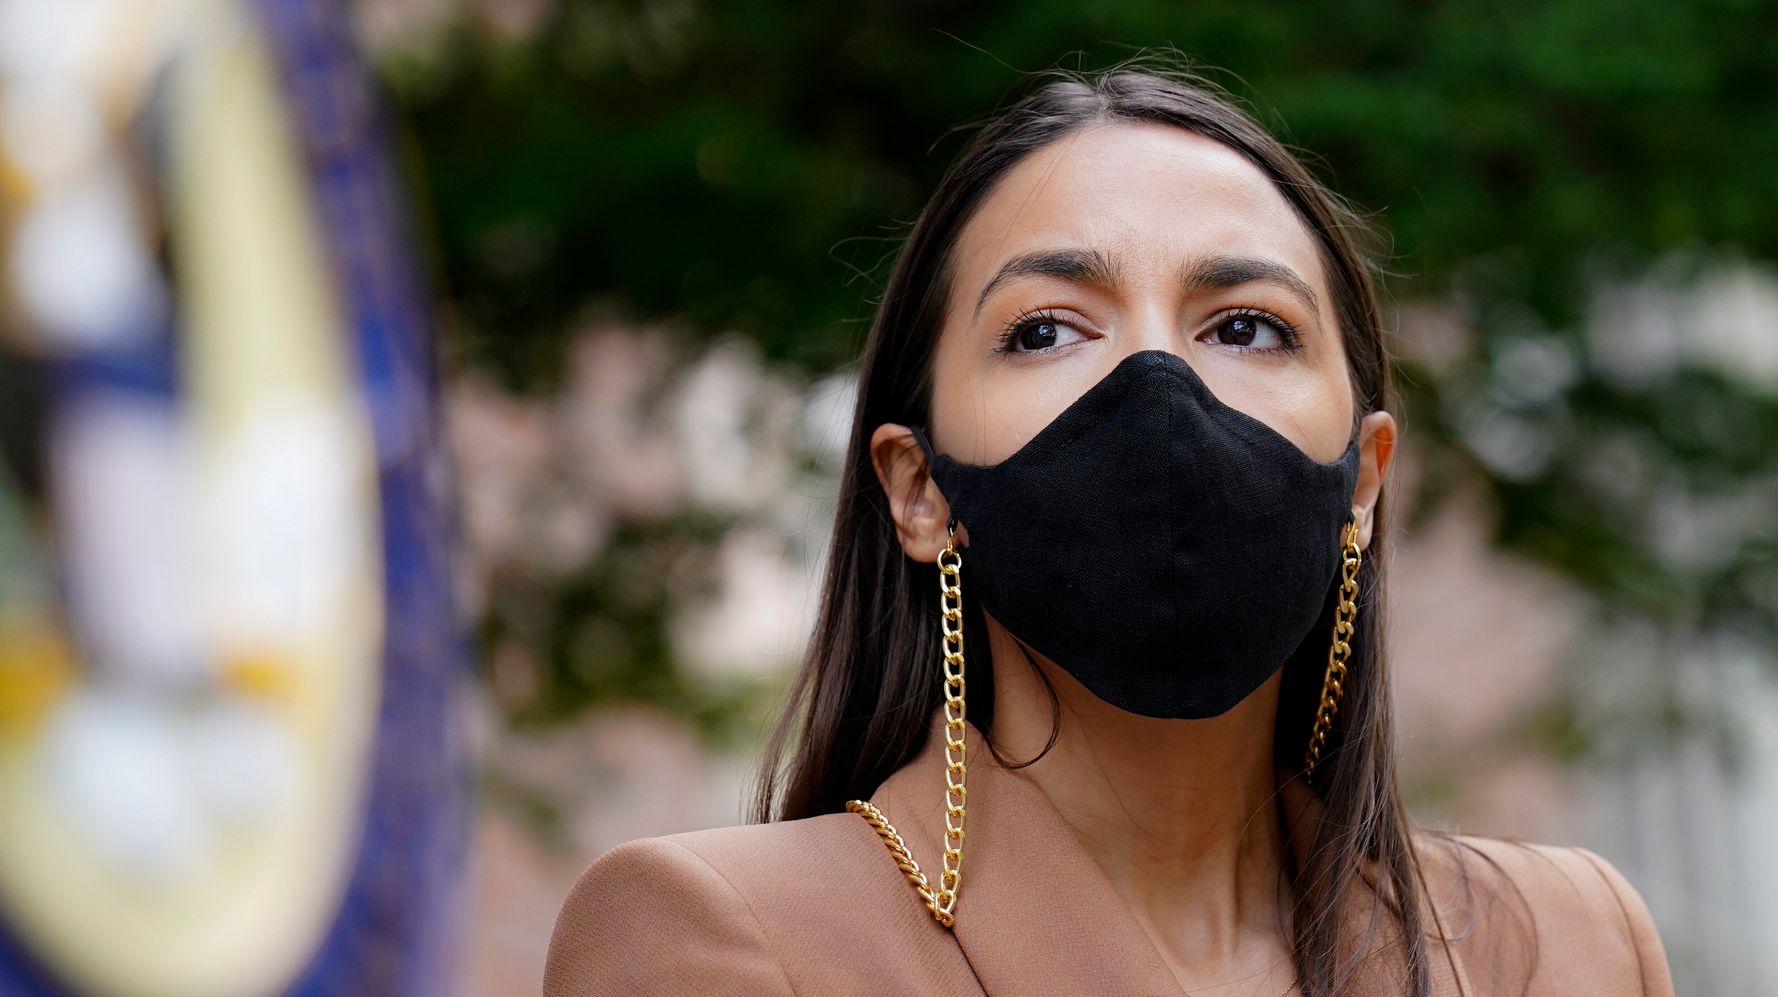 Ocasio-Cortez Shreds Fox News Report Attacking Her For Wearing Pricey Clothes